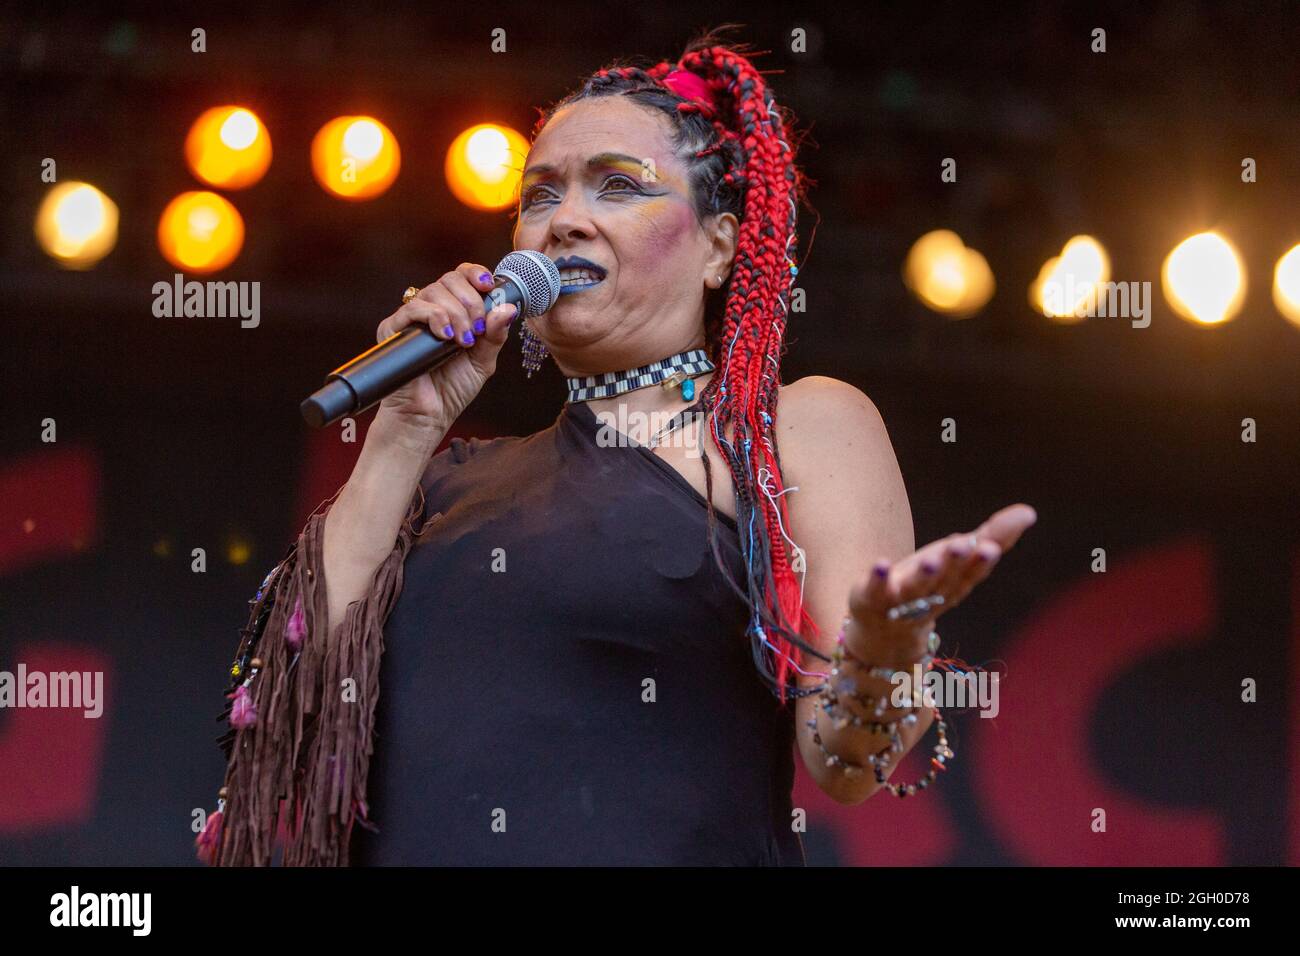 Milwaukee, USA. 03rd Sep, 2021. Annabella Lwin of Annabella's Bow Wow Wow during the Summerfest Music Festival on September 3, 2021, in Milwaukee, Wisconsin (Photo by Daniel DeSlover/Sipa USA) Credit: Sipa USA/Alamy Live News Stock Photo